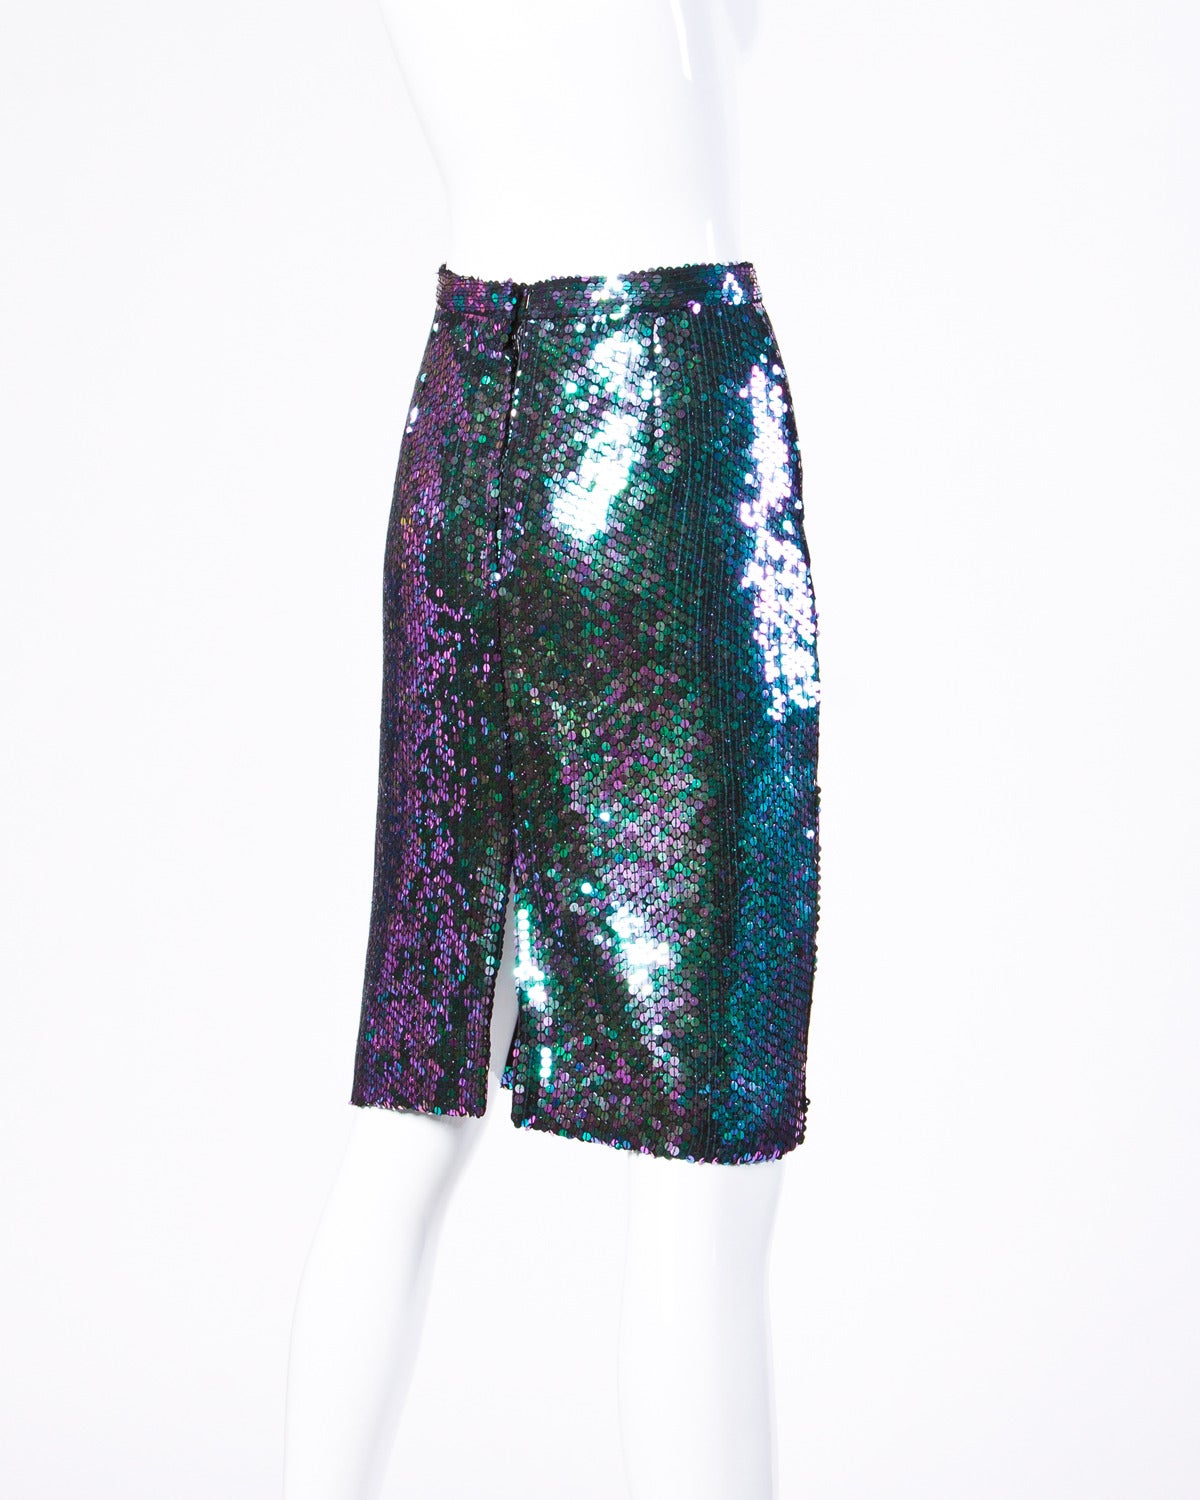 Vintage 1985 iridescent green sequin skirt by Jeanette for St. Martin.

Details:

Fully Lined
Back Zip and Hook Closure
Marked Size: 10
Estimated Size: Medium
Color: Black/ Green/ Purple
Label: Jeanette for St.